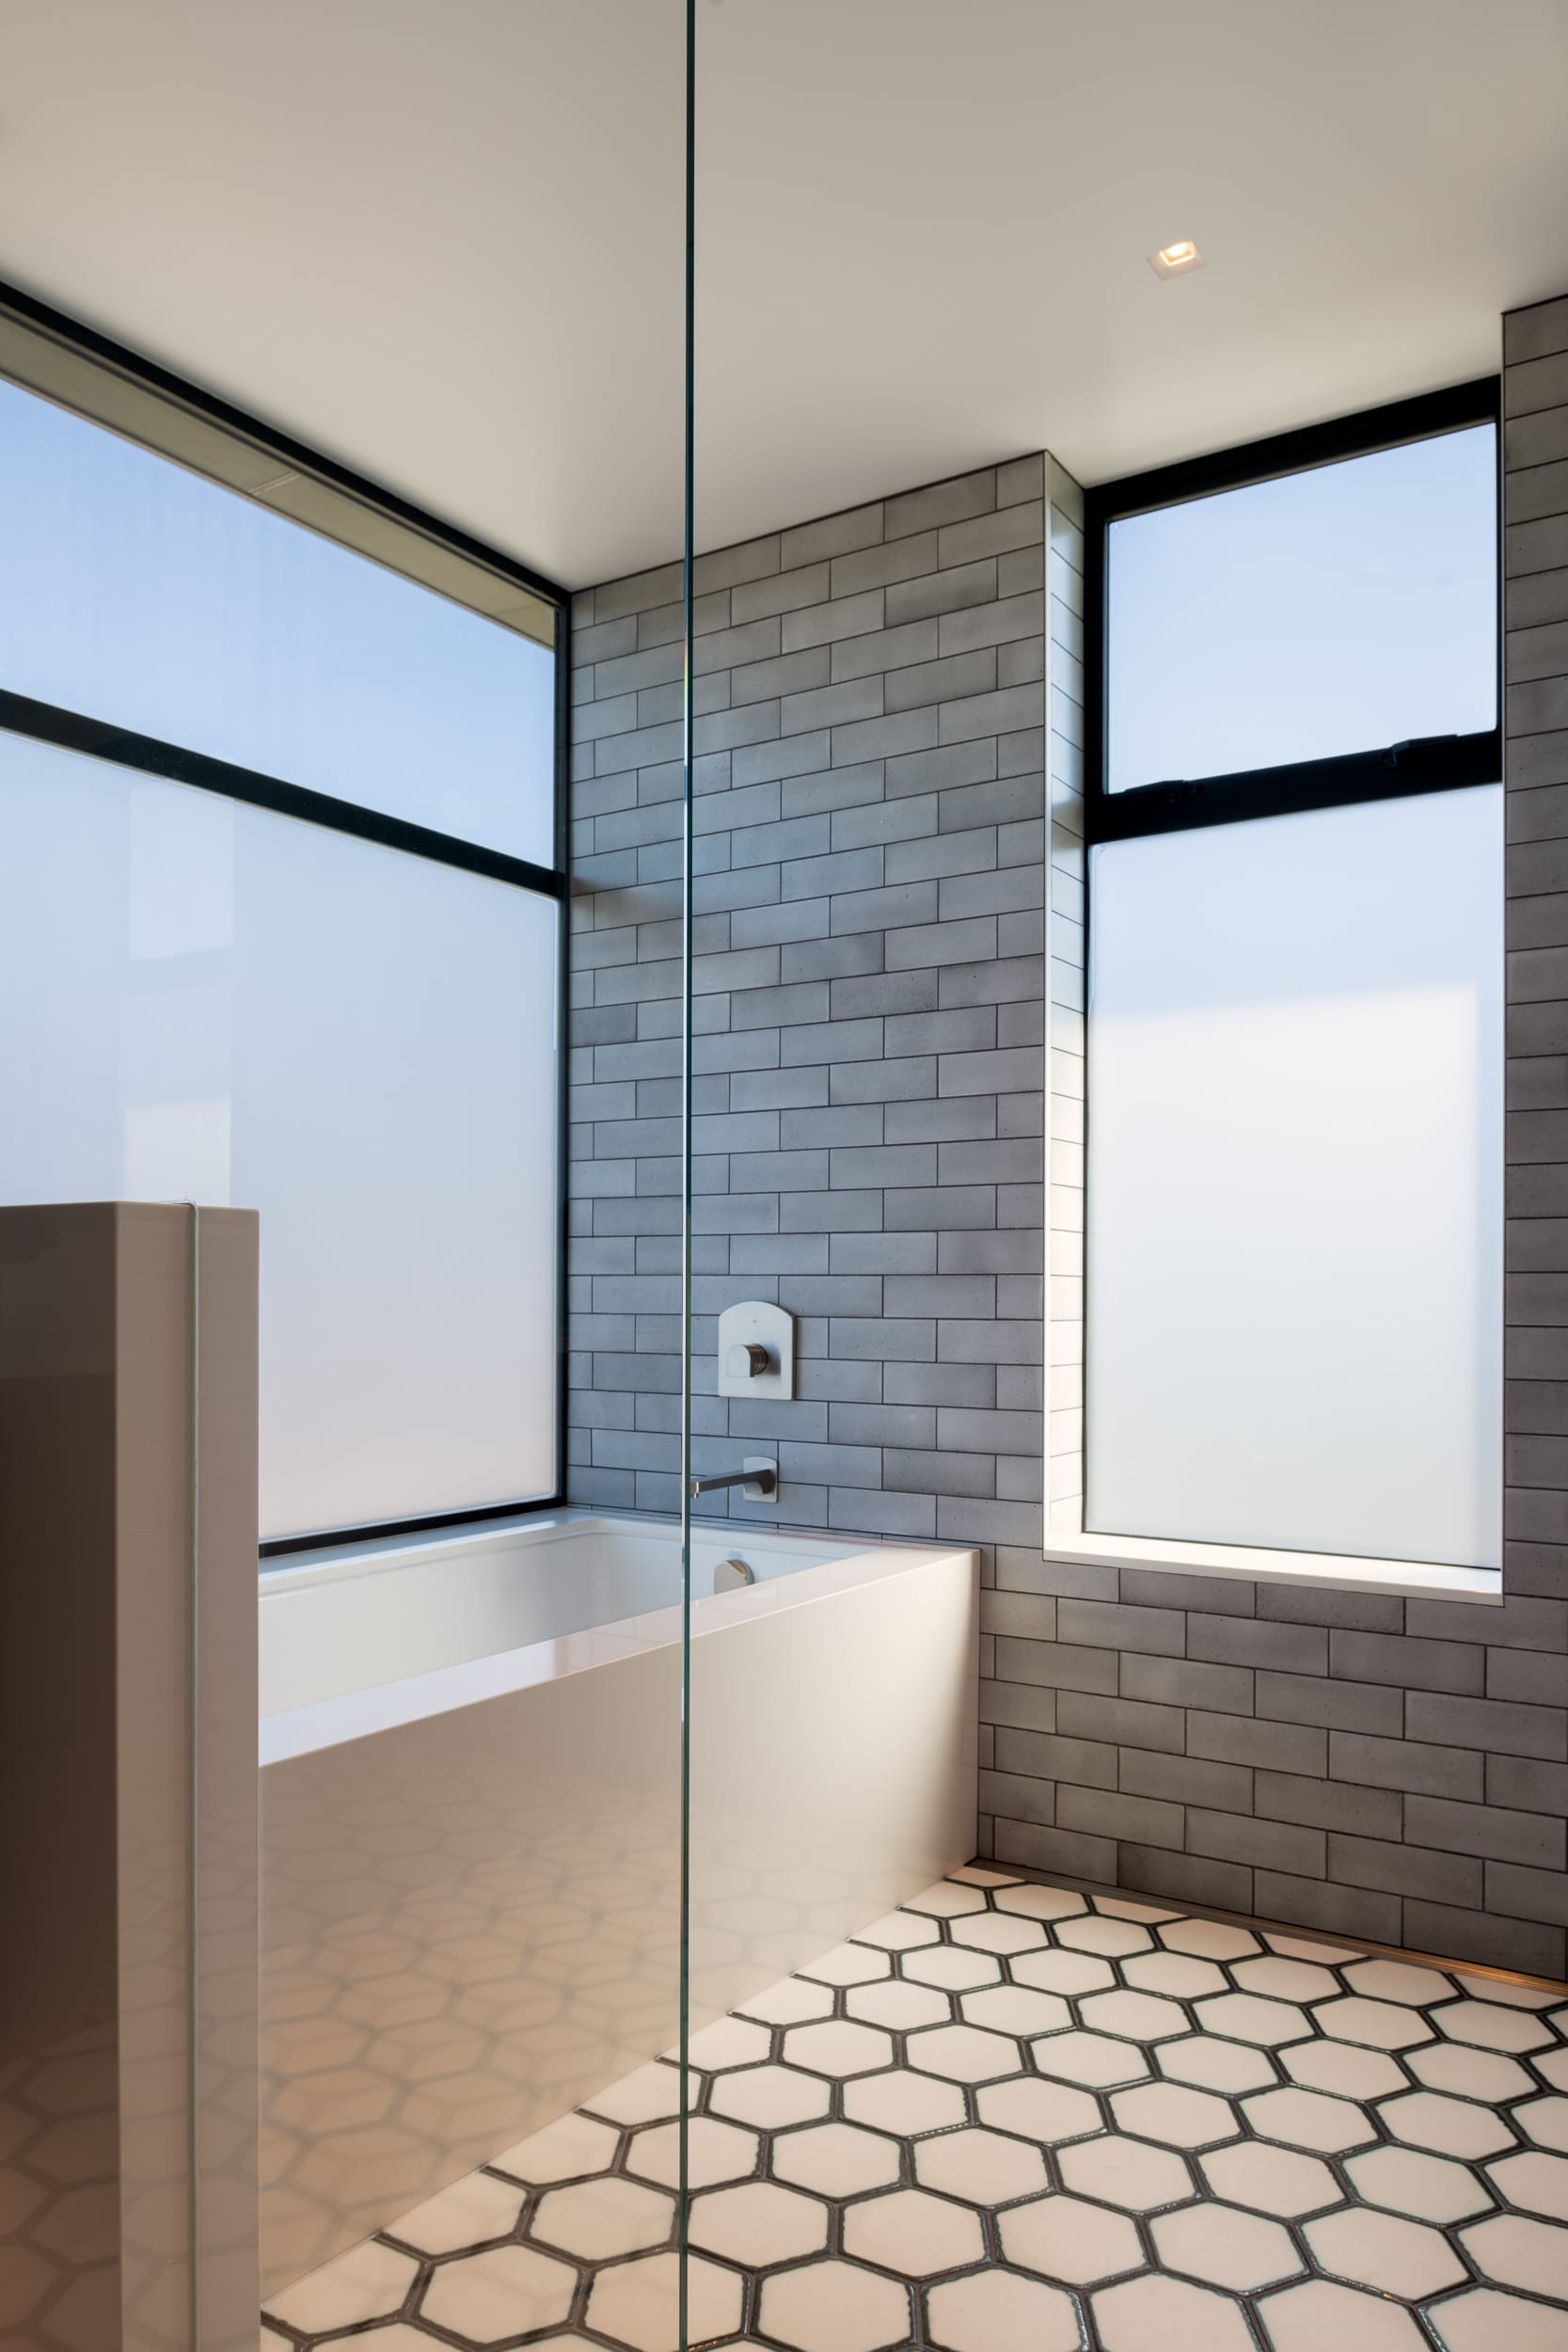 A bathroom with a glass shower and tiled floor.